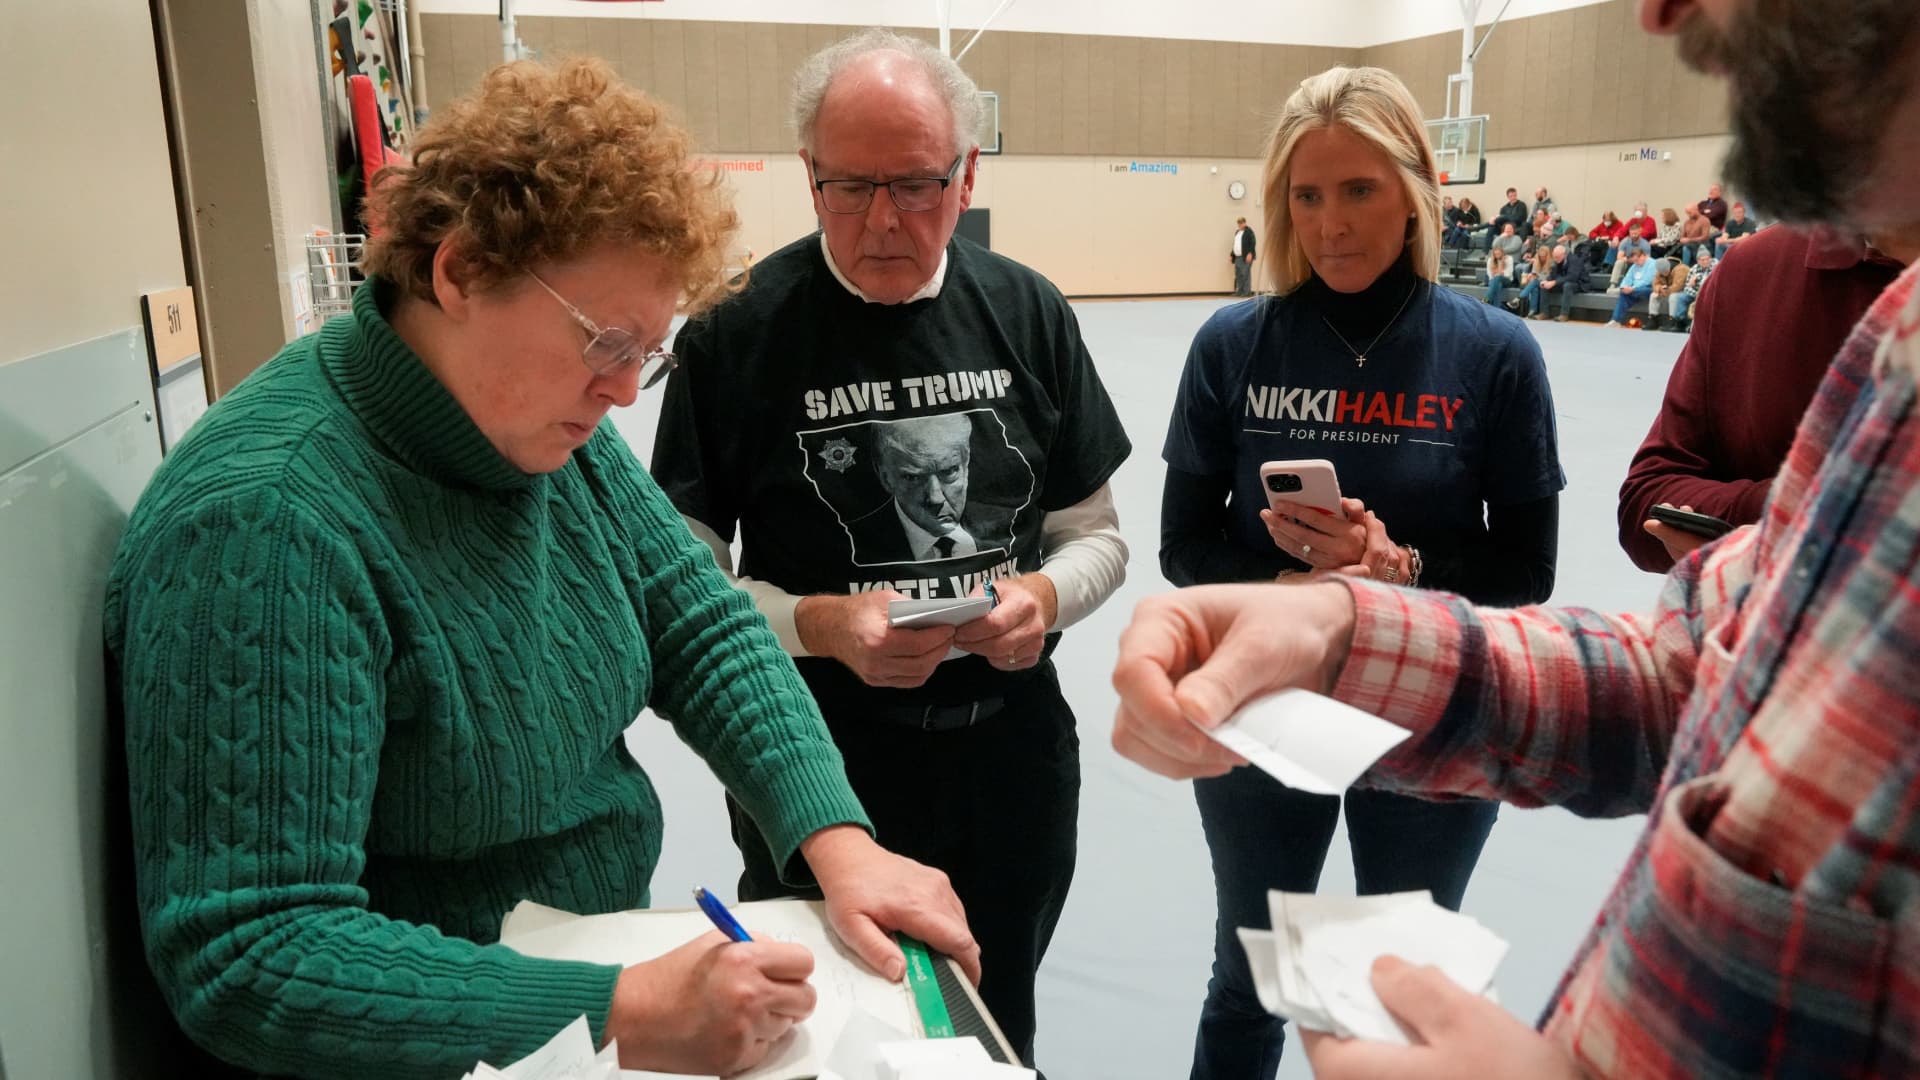 Votes are counted during a caucus to choose a Republican presidential candidate, at Fellows Elementary School, in Ames, Iowa, U.S. January 15, 2024. 